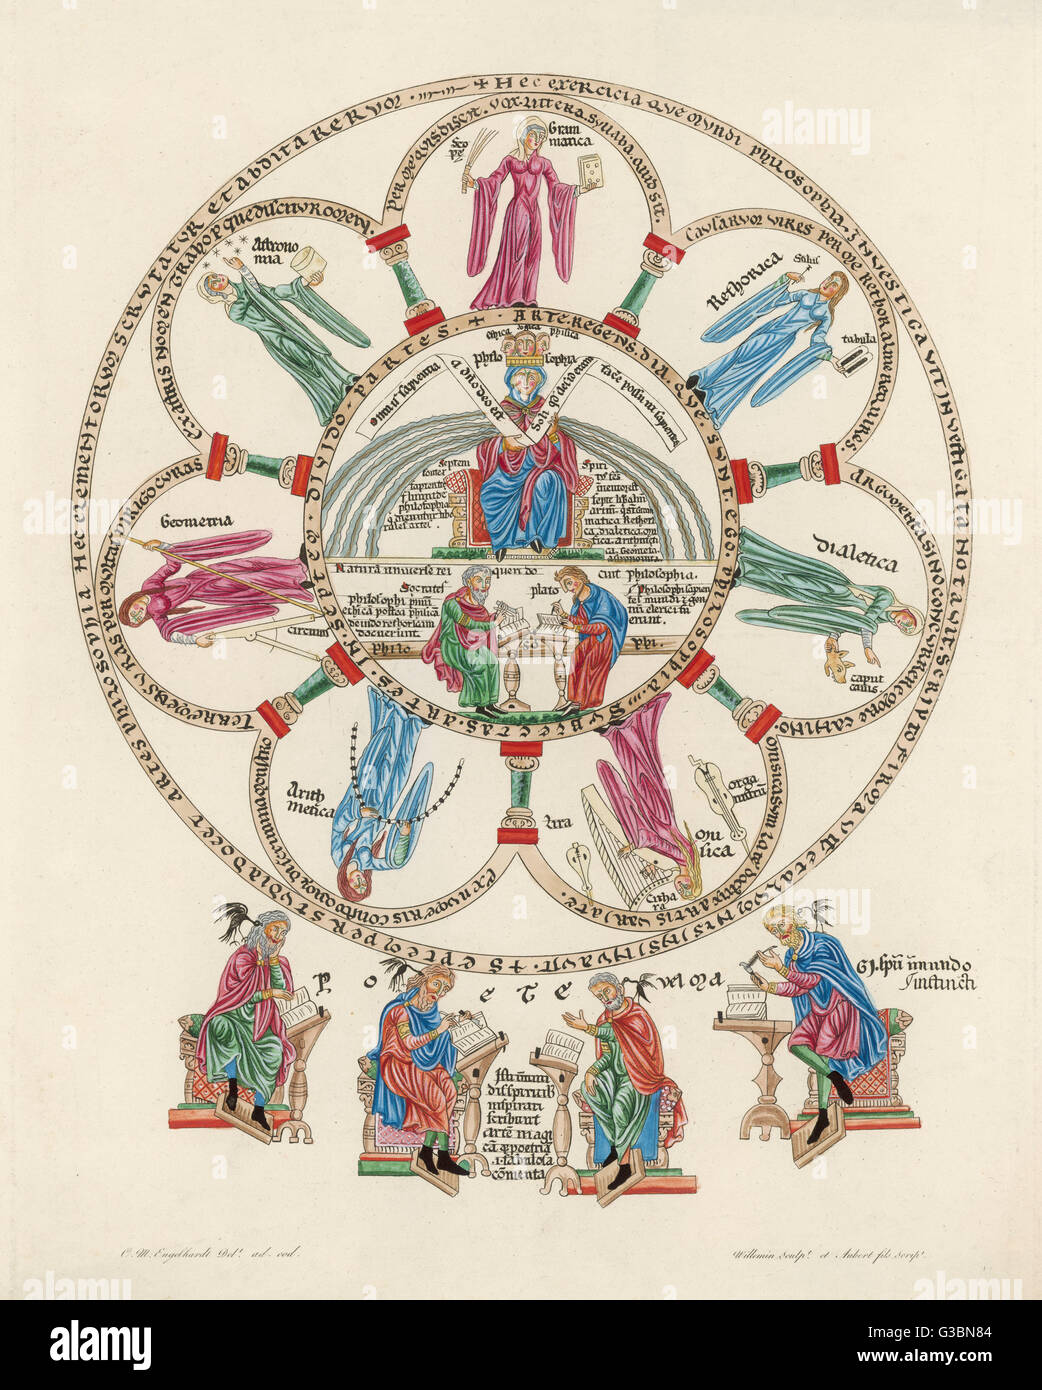 Philosophy enthroned, surrounded by the sciences - Grammar,  Rhetoric, Linguistics, Music, Arithmetic, Geometry and  Astronomy, with Socrates and Plato and scholars writing.     Date: medieval Stock Photo